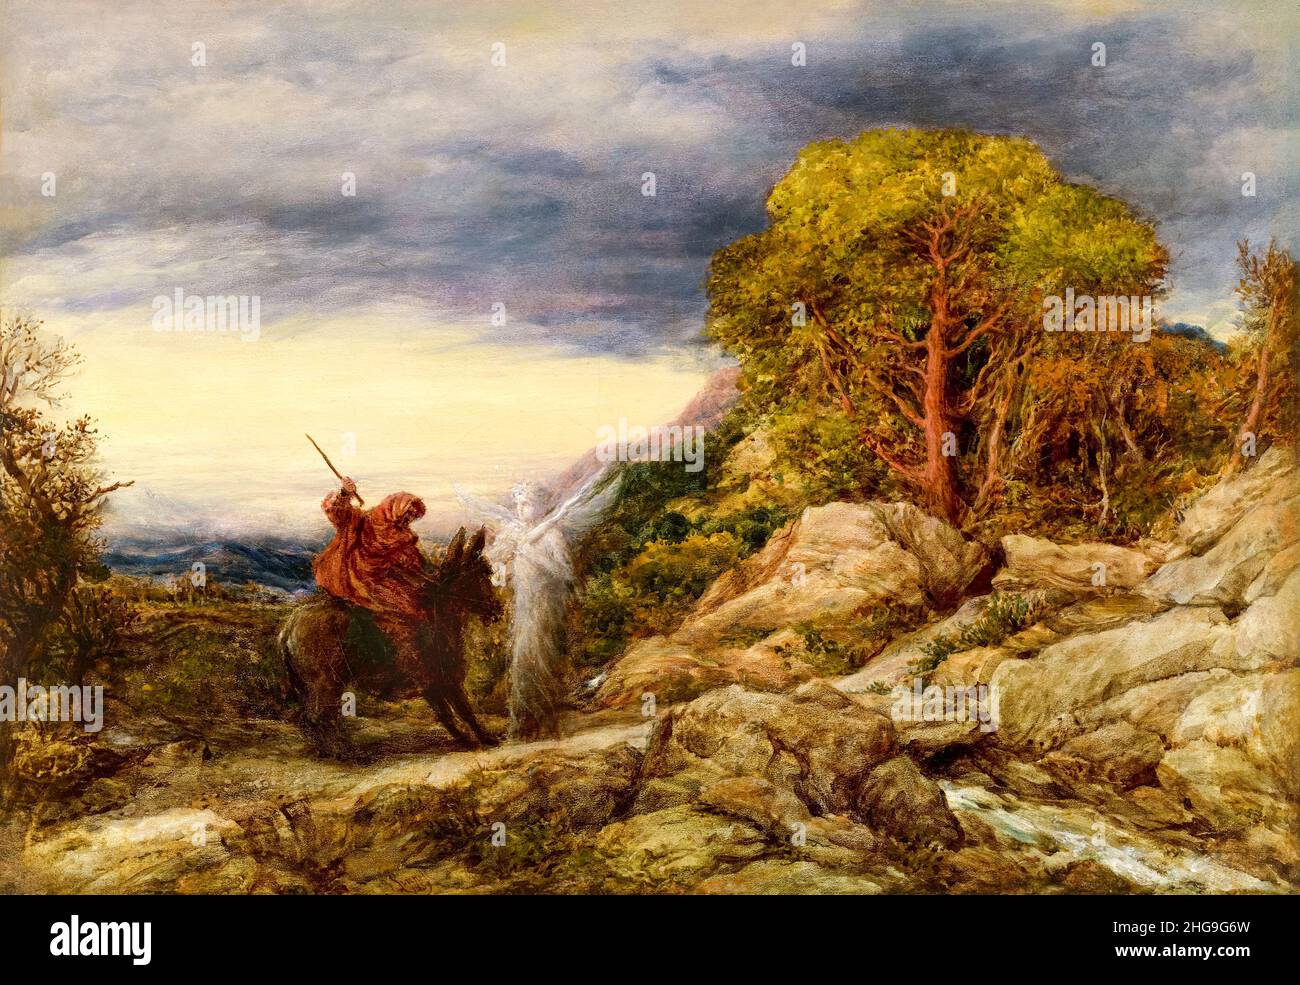 The Prophet Balaam and the Angel, painting by John Linnell, 1859 Stock Photo